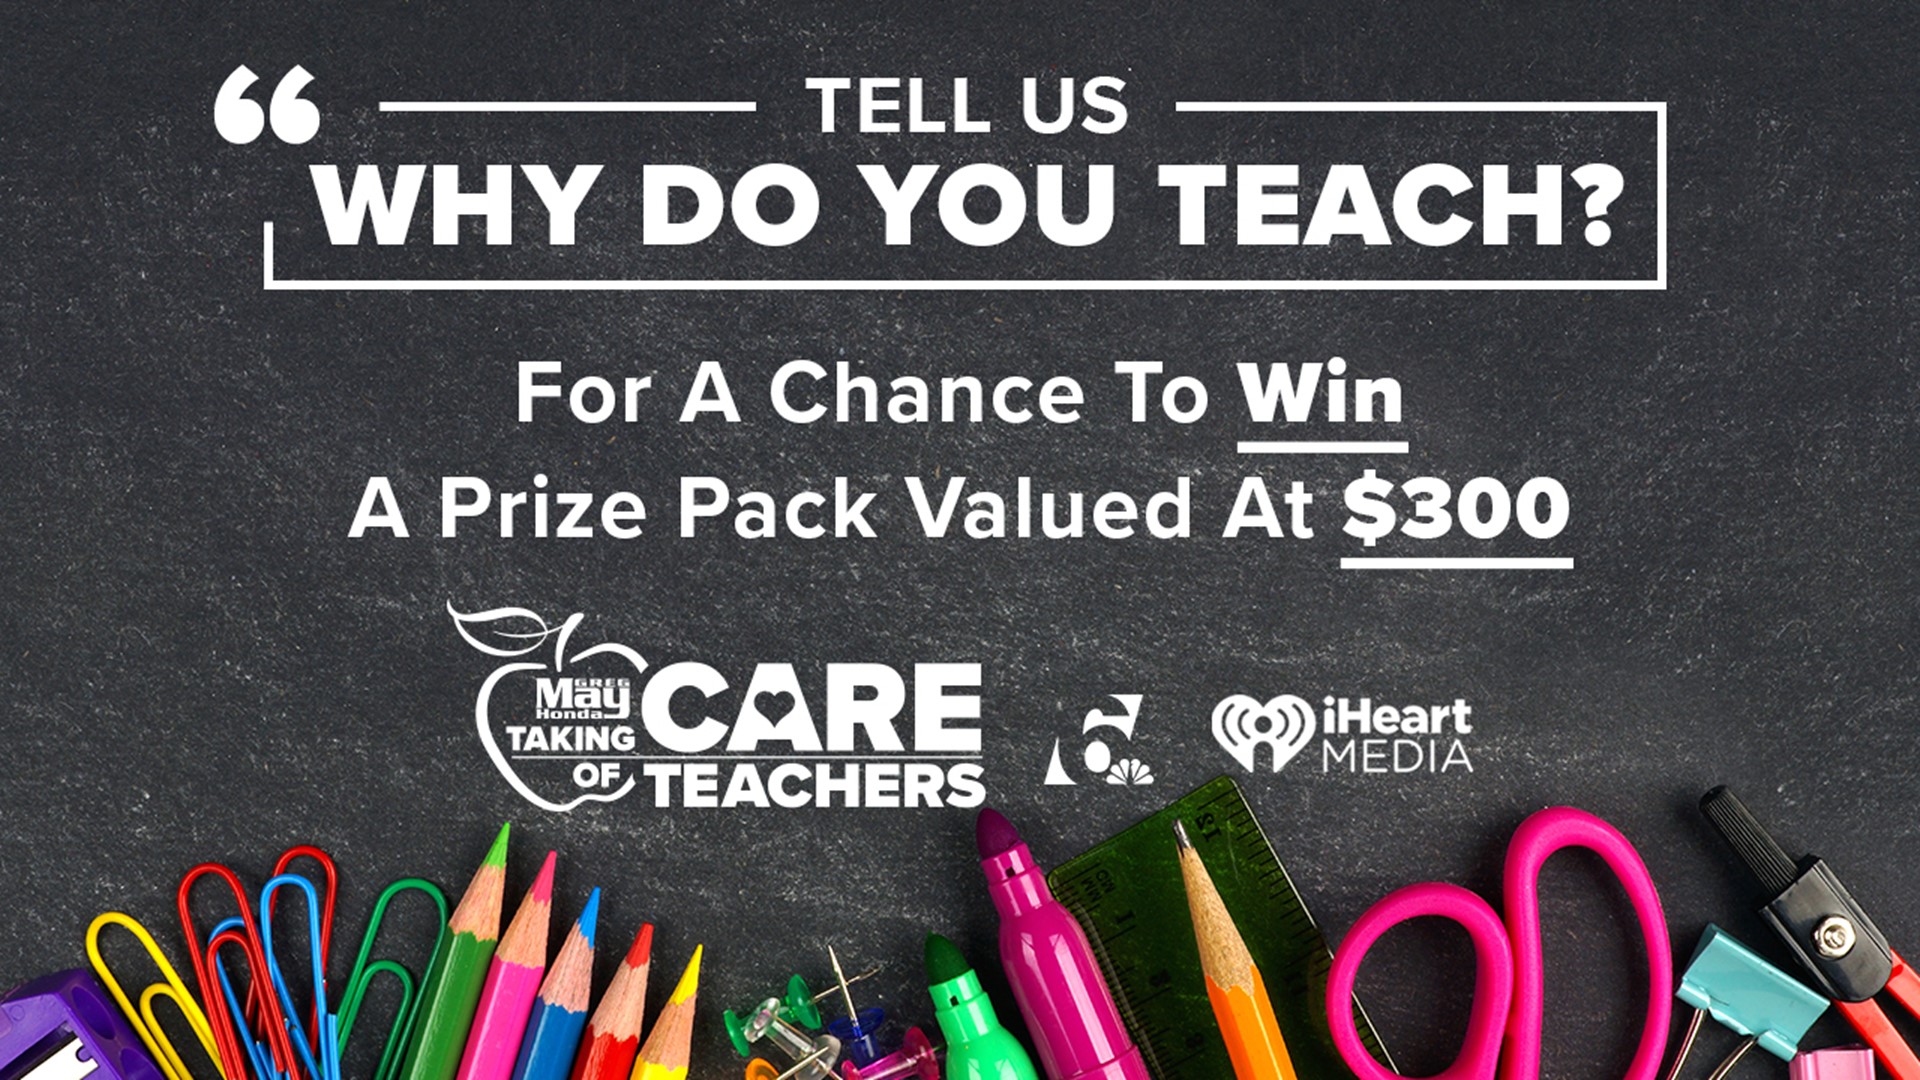 Why do you teach? Greg May Honda, iHeart Media and 6 News want to know for your chance to win a prize pack valued at $300!